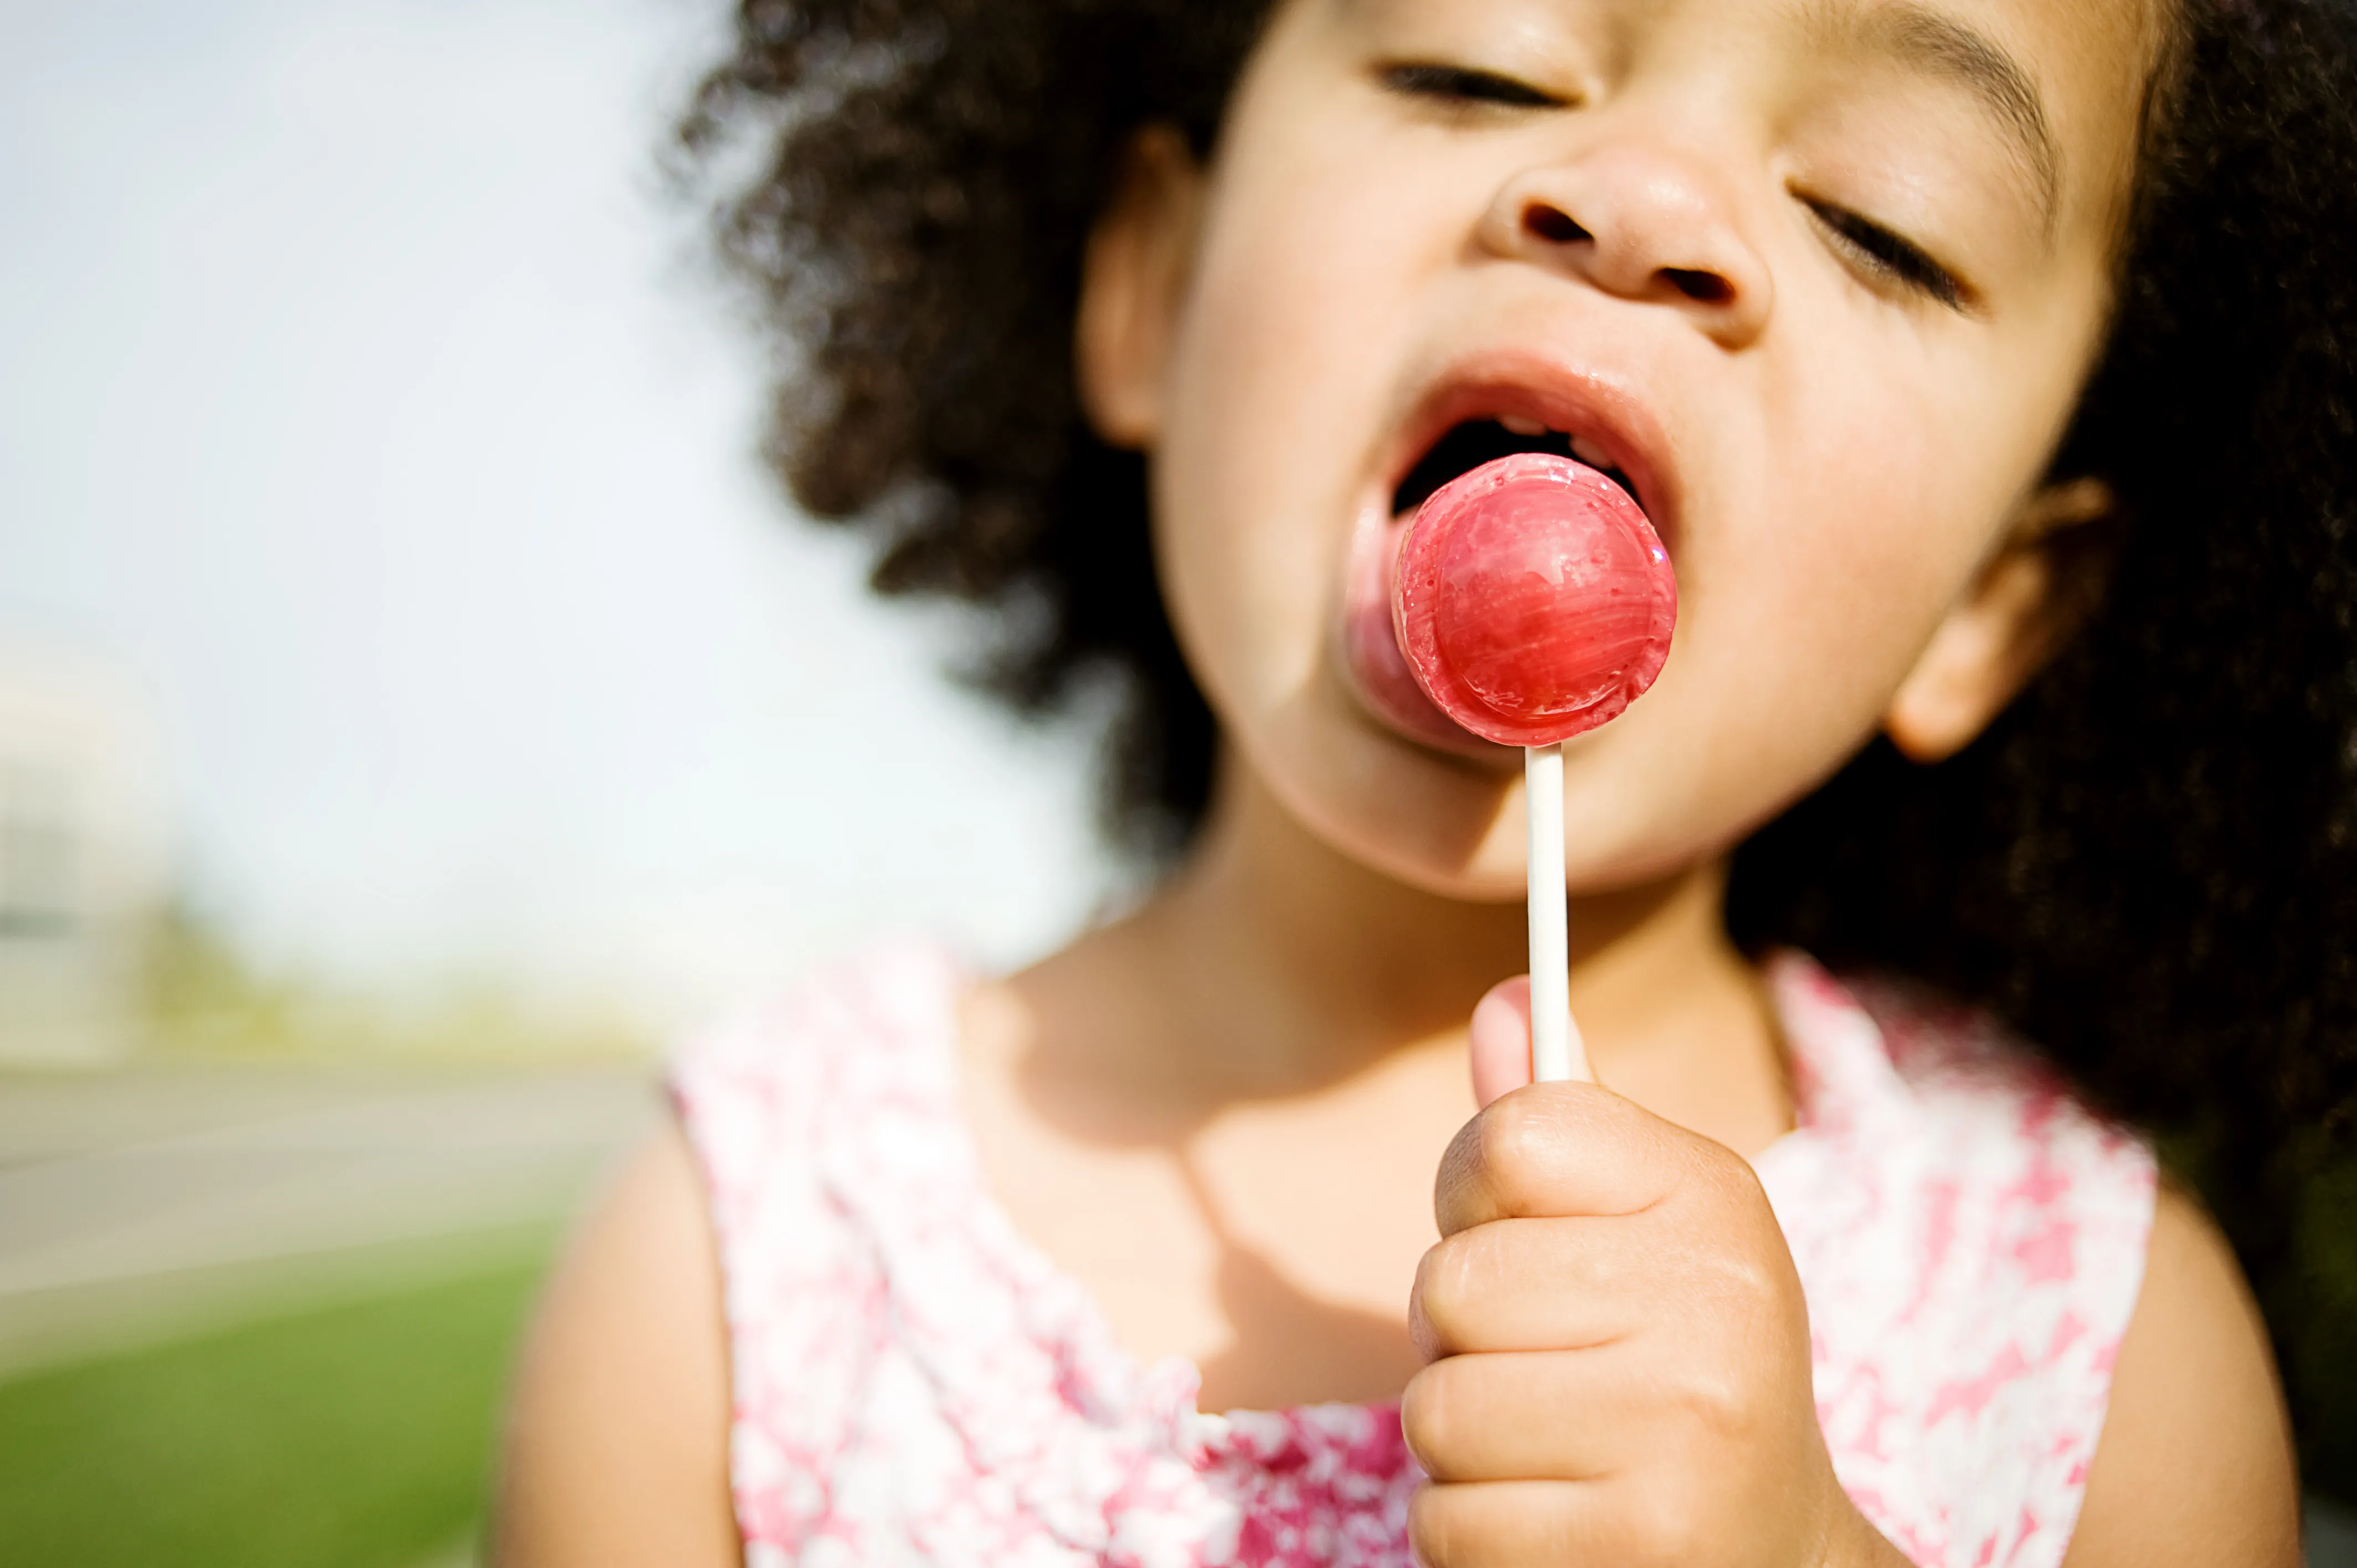 instructions-on-how-to-eat-a-lollipop-for-kids